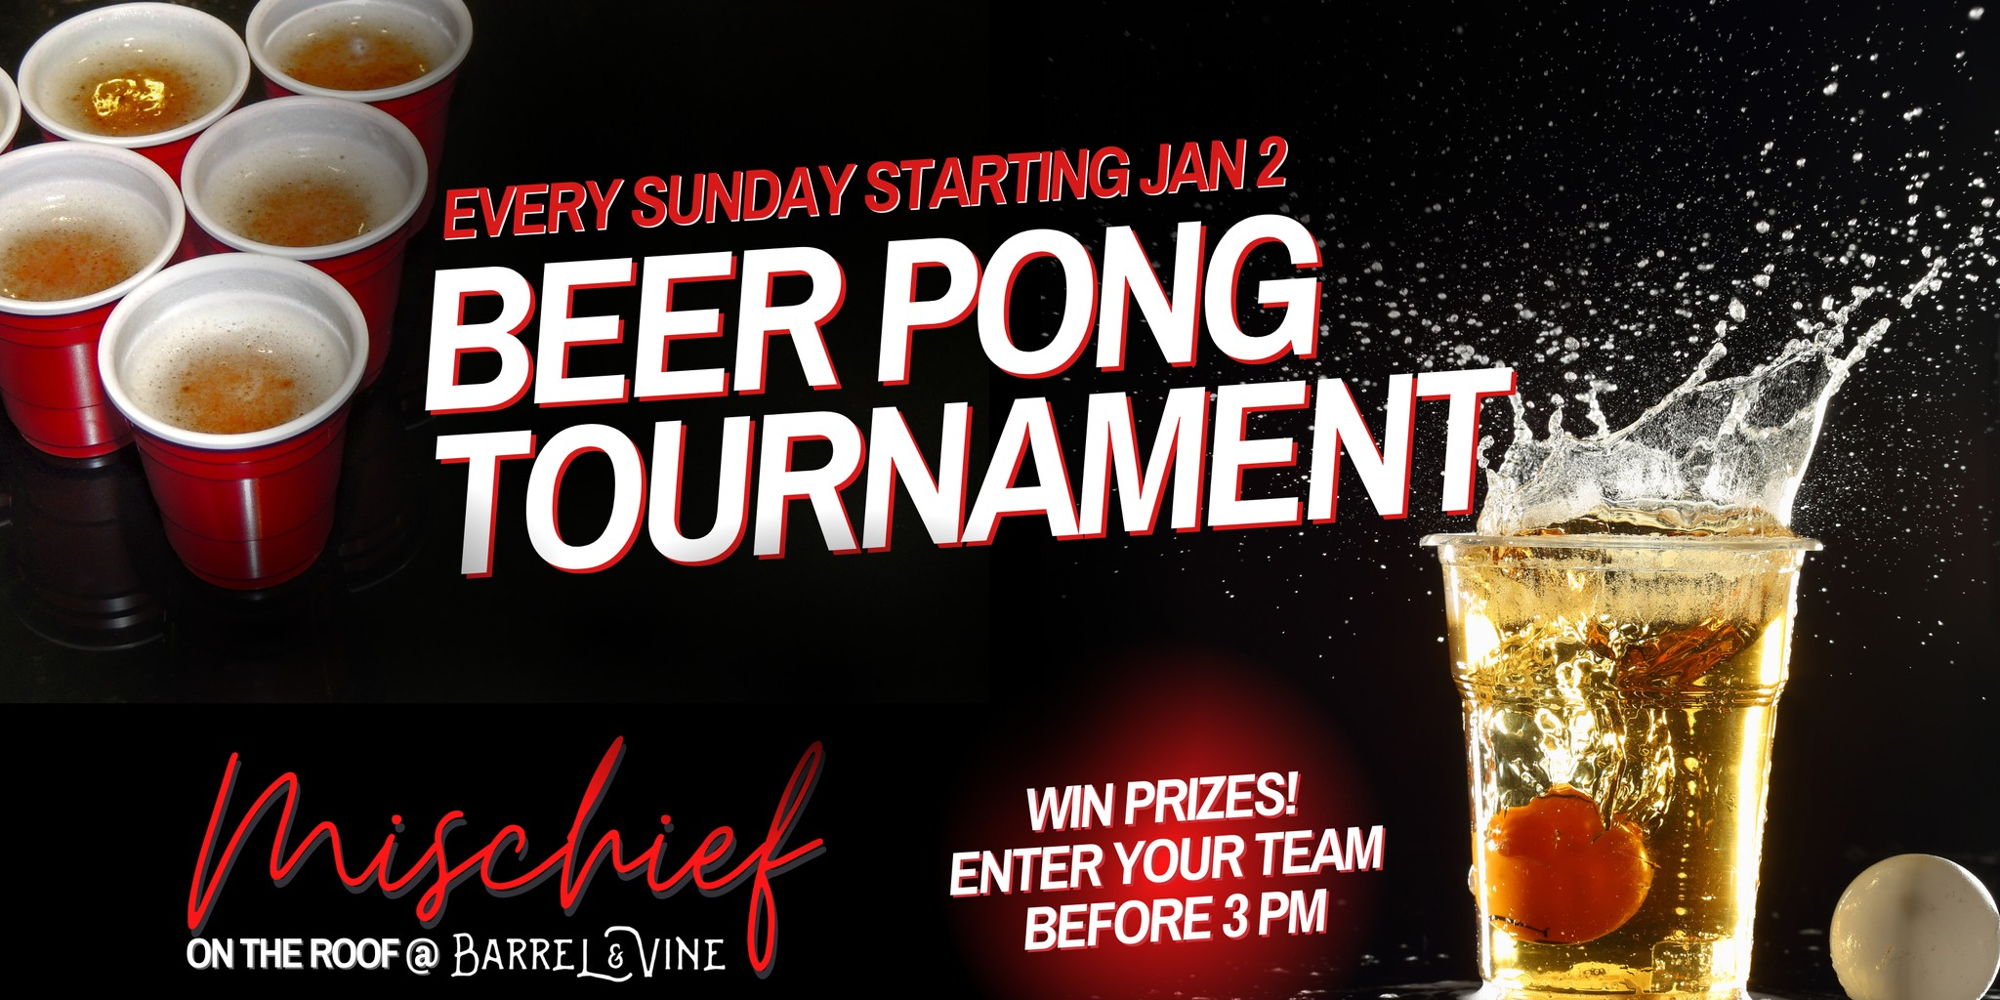 Beer Pong Tournaments | Every Sunday @ 3 PM | Win Prizes promotional image